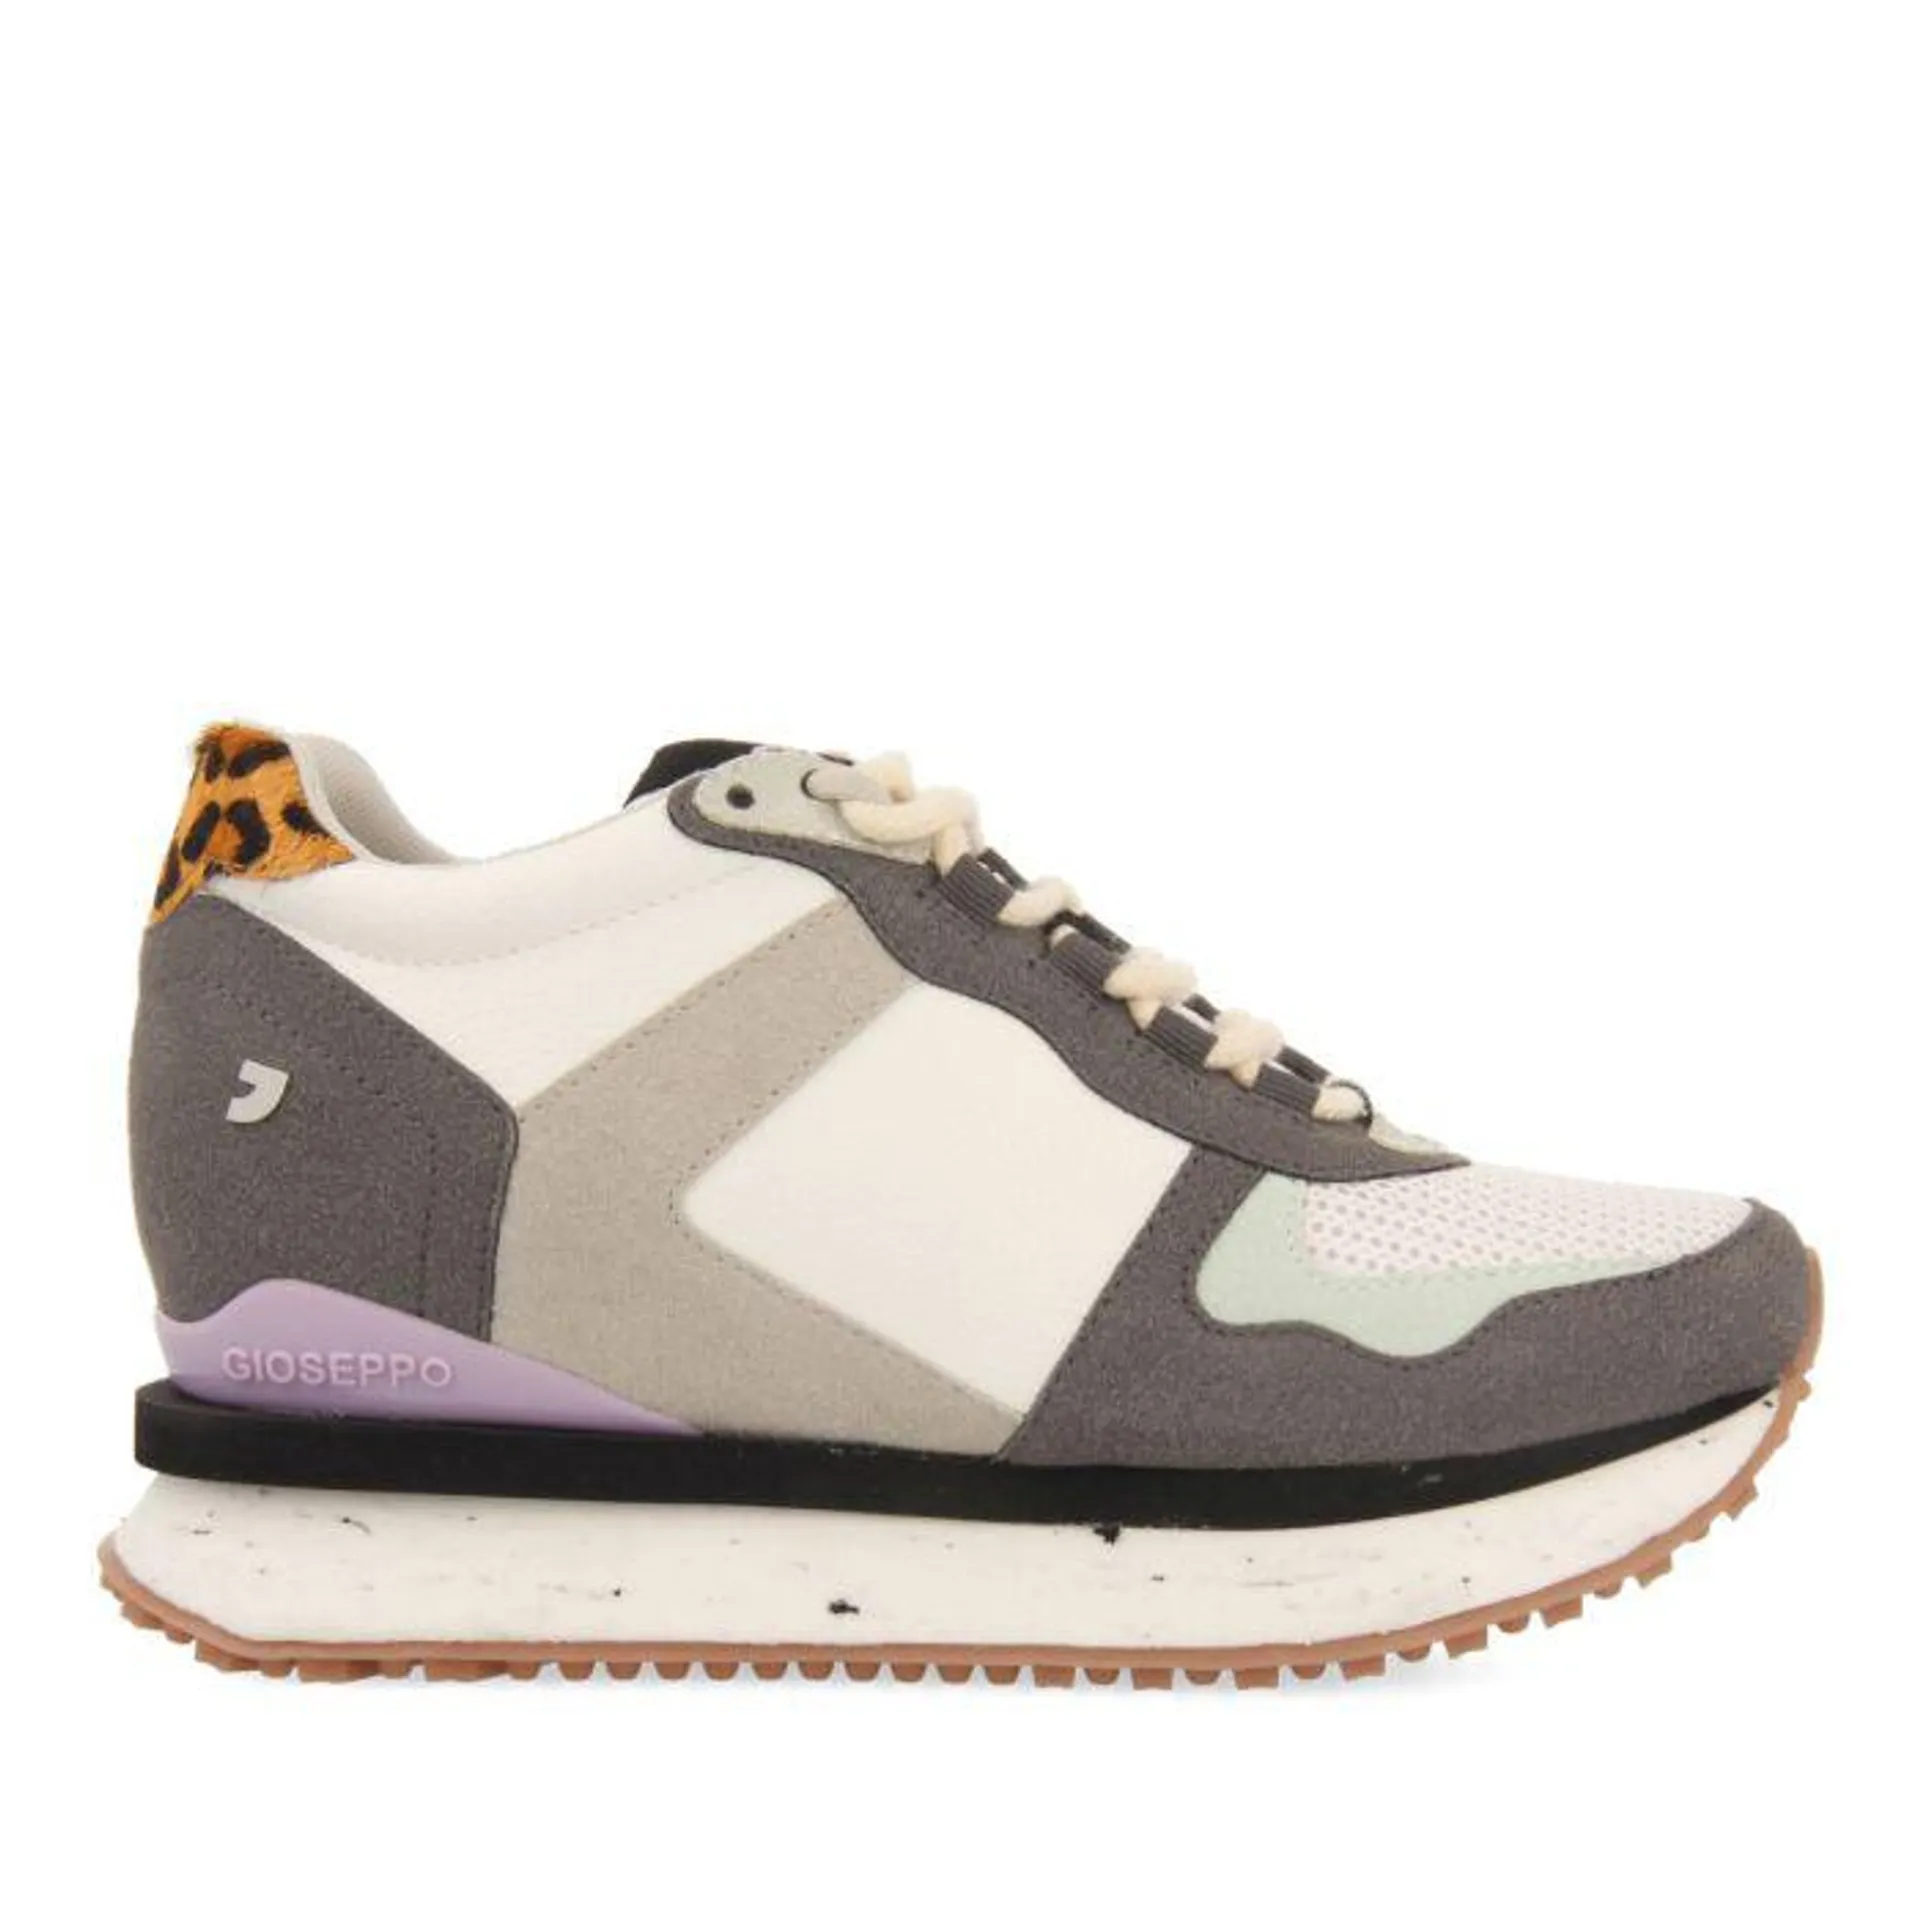 Berle women's multicoloured sneakers with animal print, denim, lilac and mint green